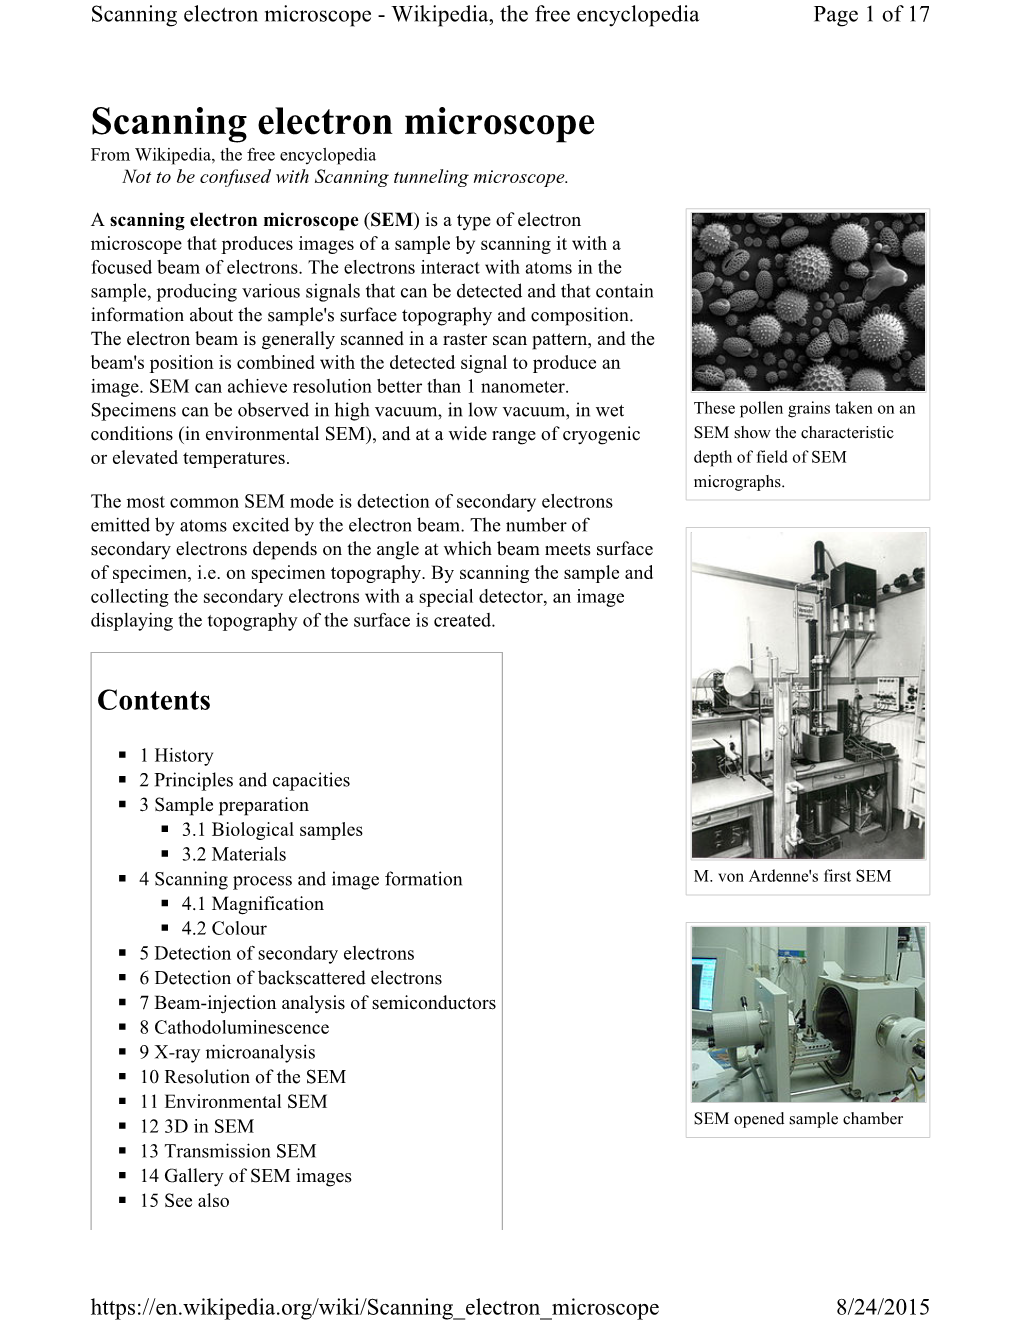 Scanning Electron Microscope - Wikipedia, the Free Encyclopedia Page 1 of 17